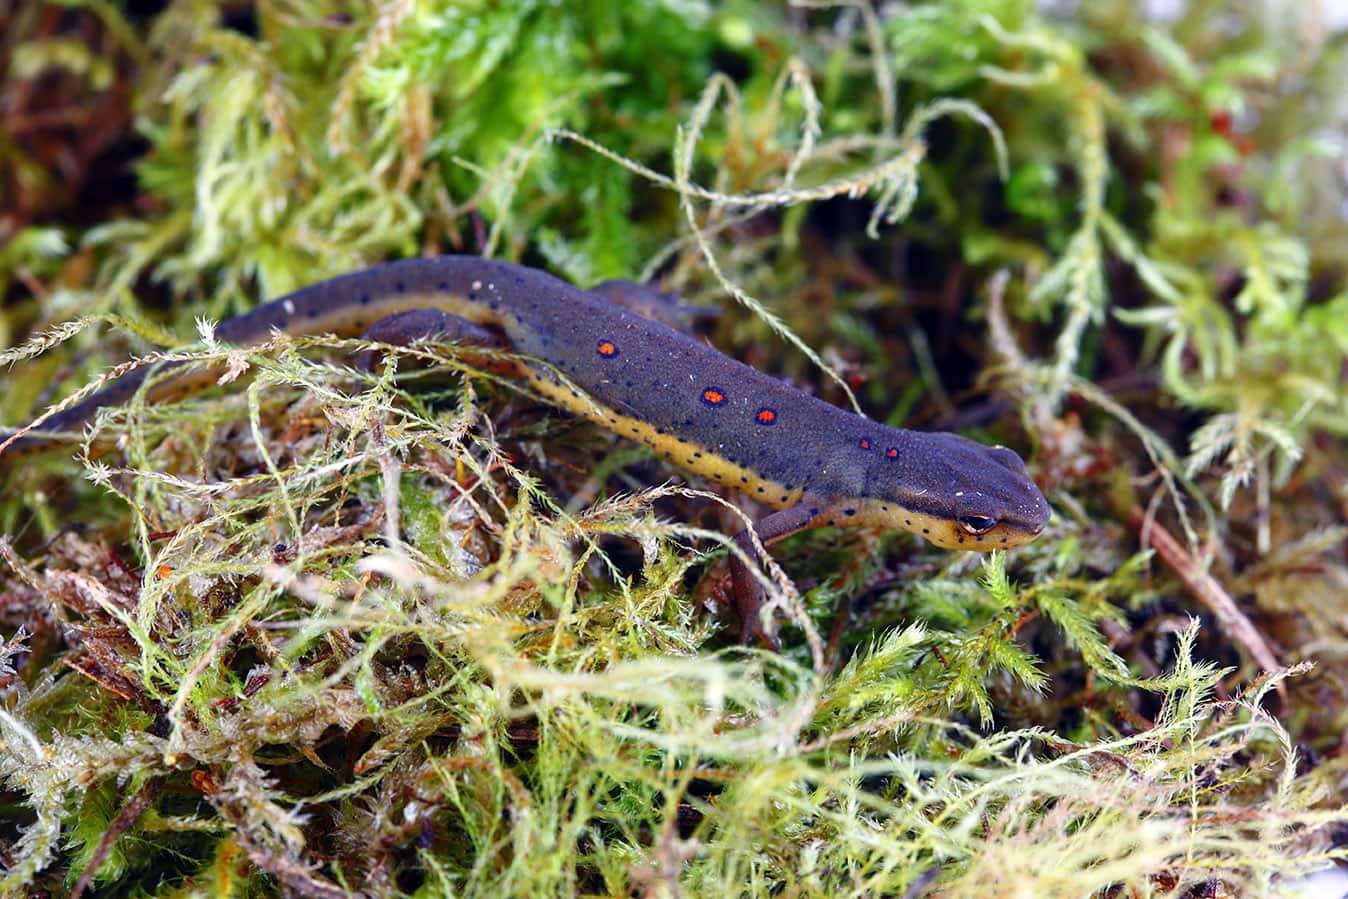 what is the difference between a newt and a salamander